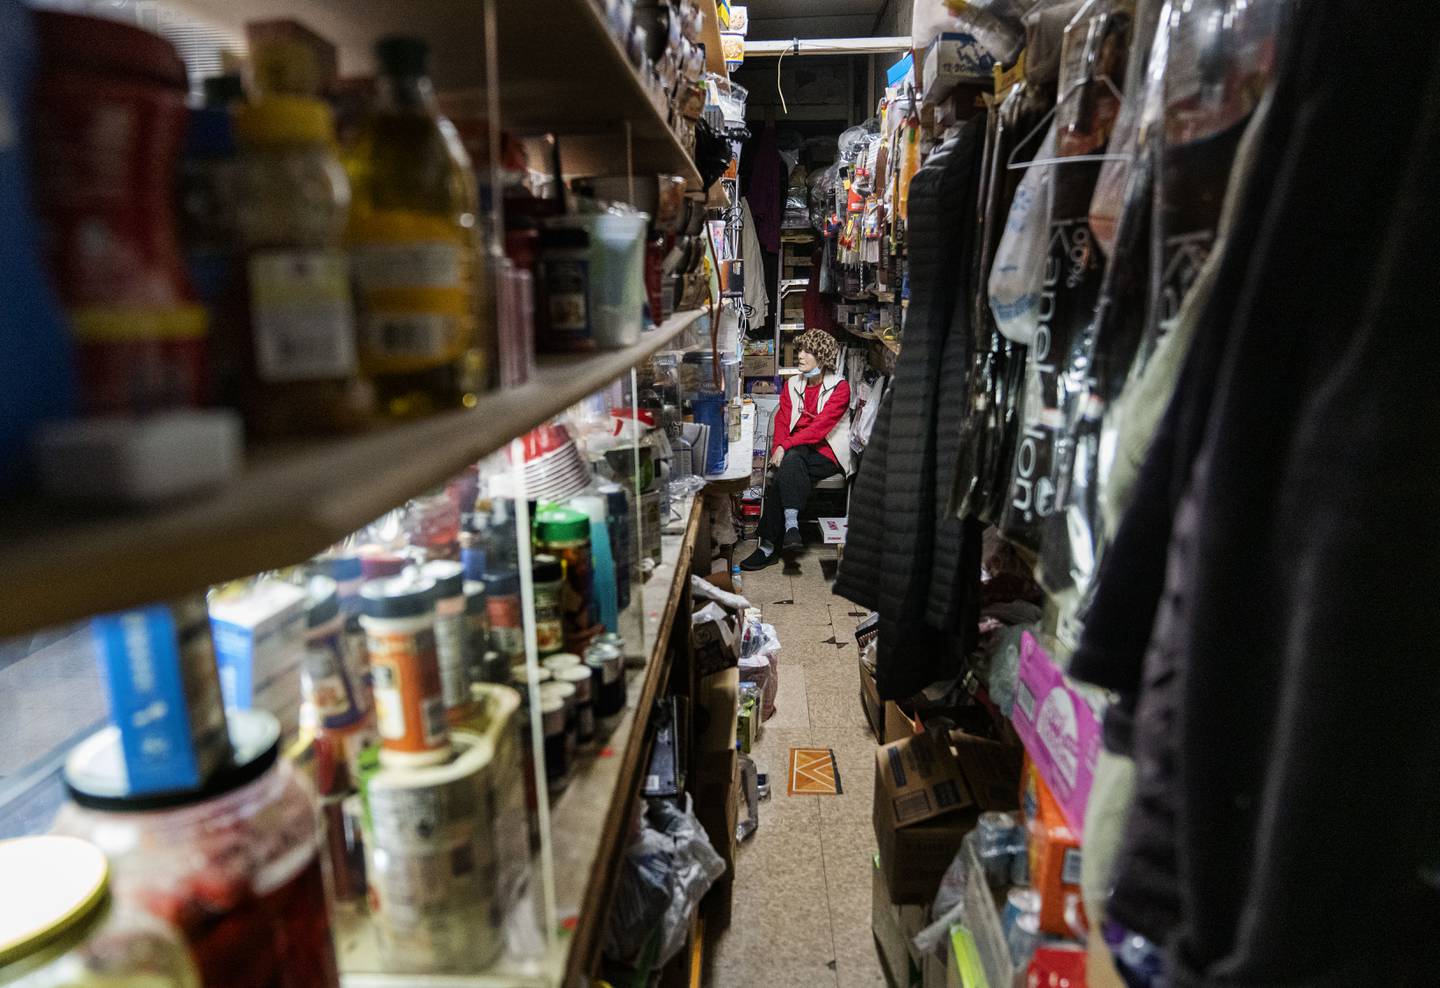 Yong Sun Pak sits waiting for customers at Lee's Mini Market, in Baltimore, Thursday, December 1, 2022.